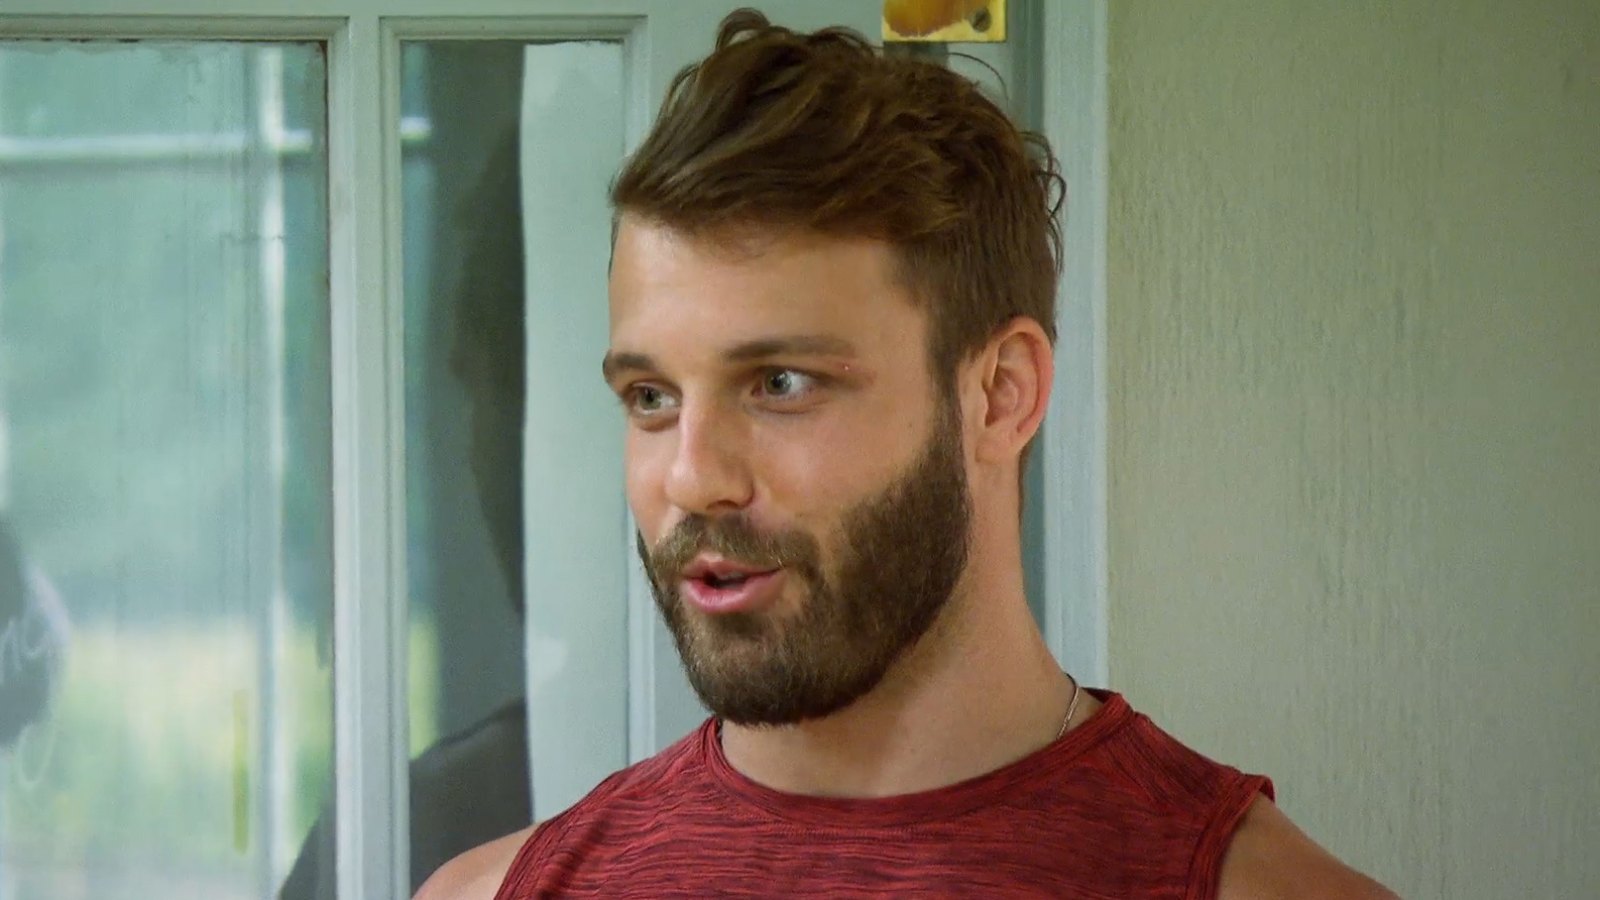 Paulie Calafiore Recaps ‘The Challenge,’ Calls Out ‘Loose Cannon’ Marie and Details Kyle’s Anger